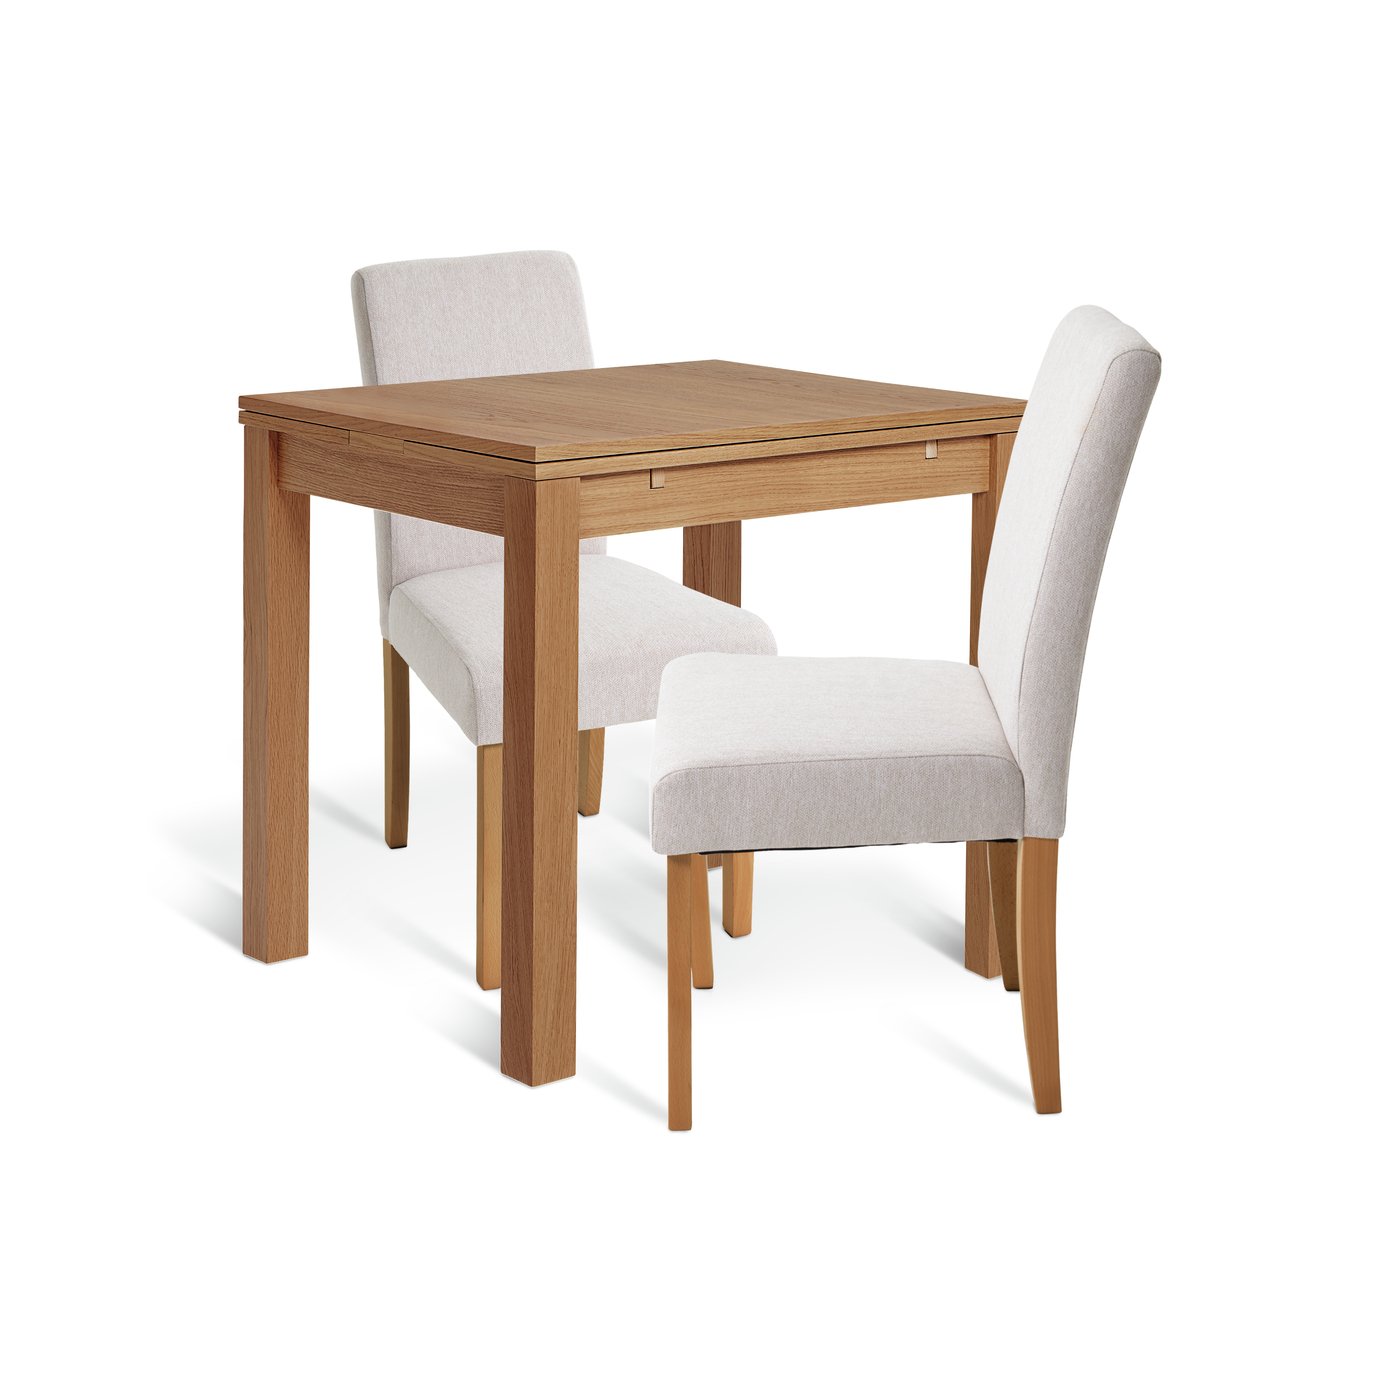 Habitat Clifton Wood Dining Table & 2 Cream Chairs